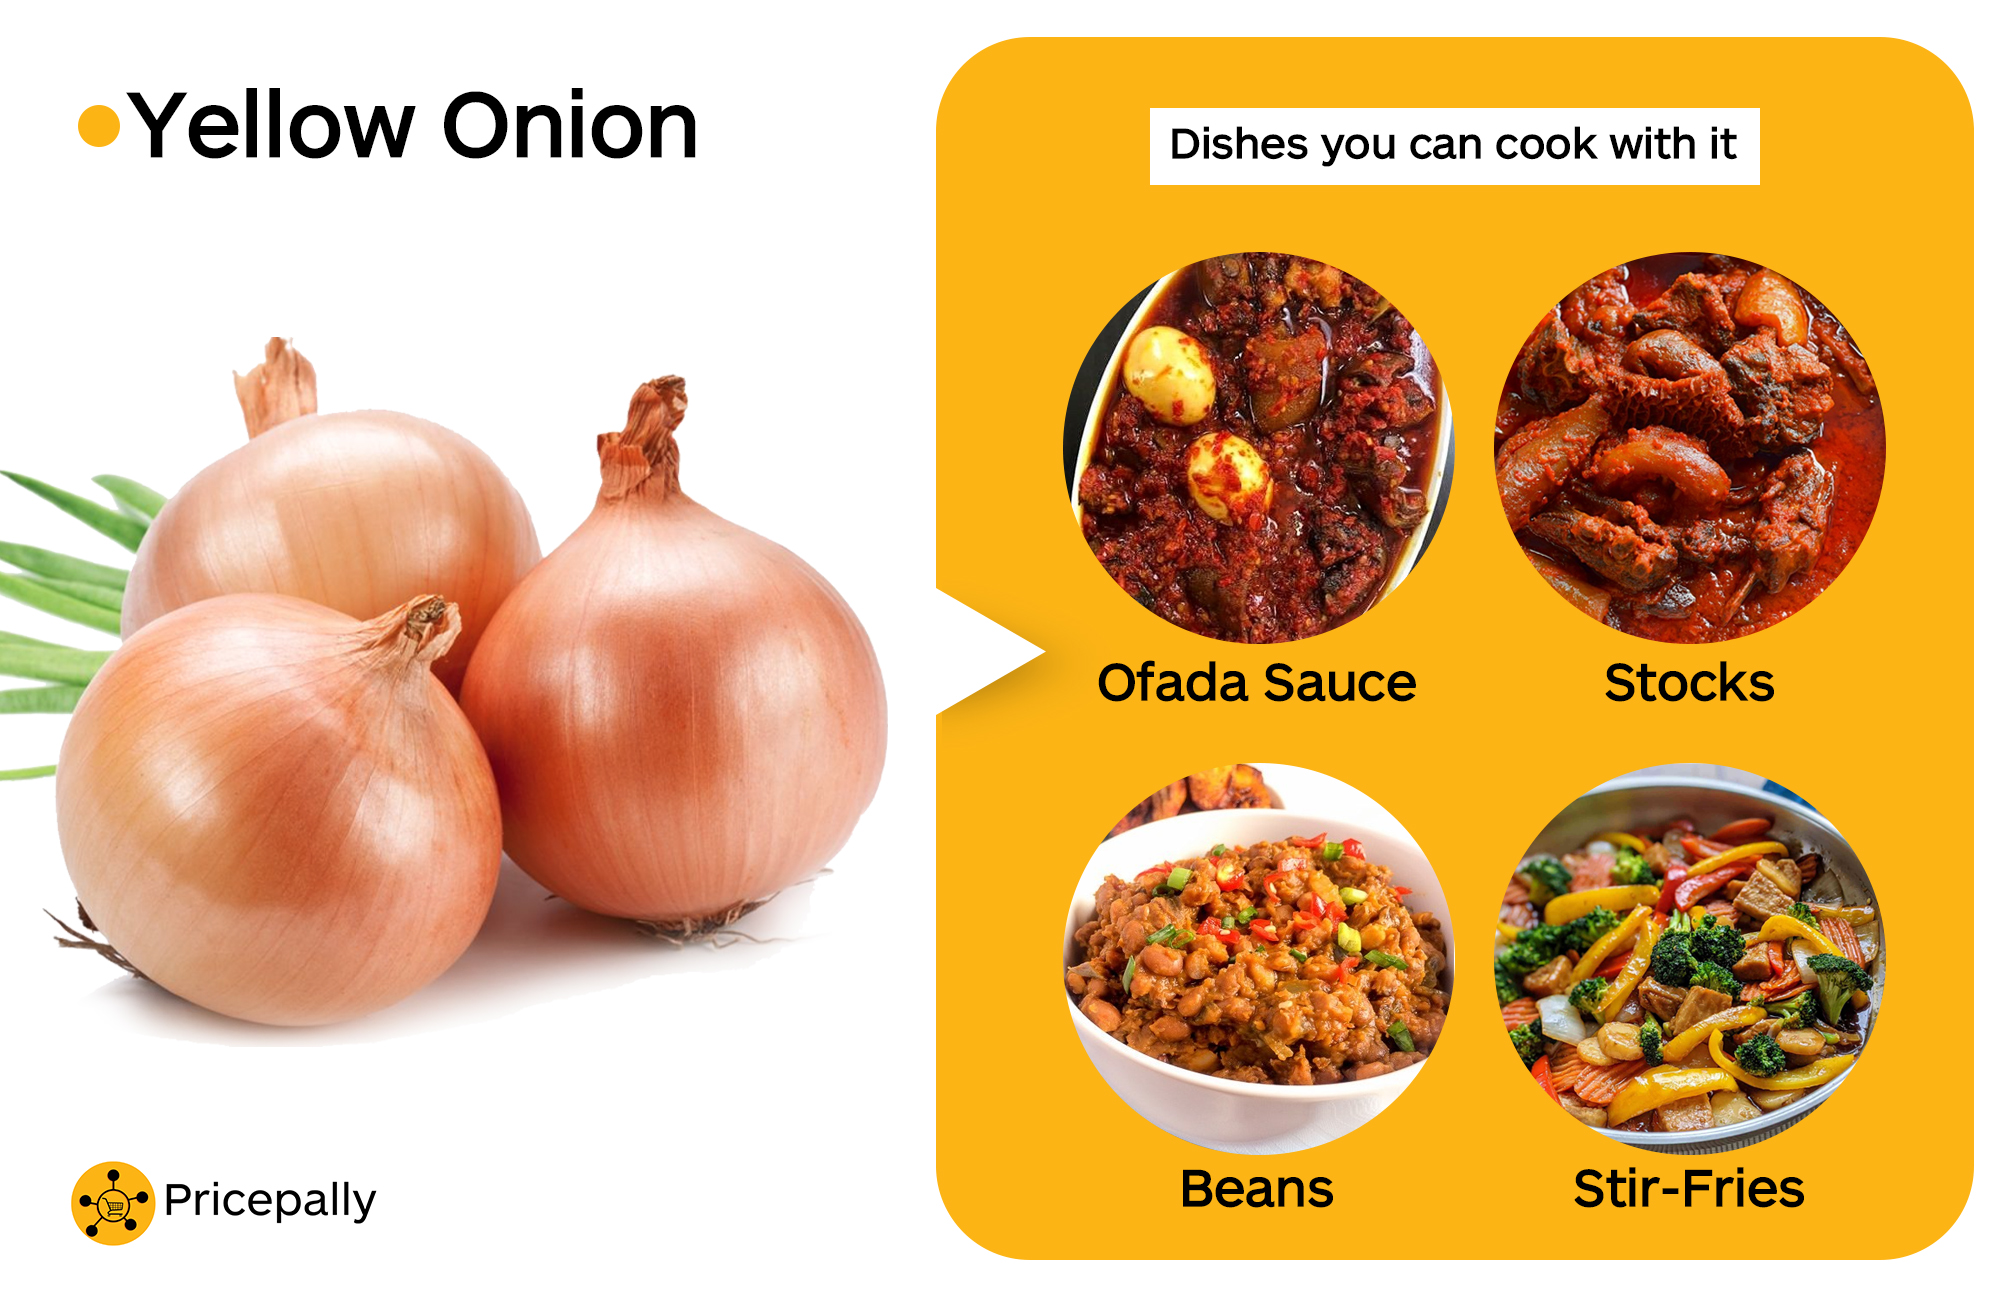 The best Nigerian dishes for yellow onions aka the "all purpose" onions